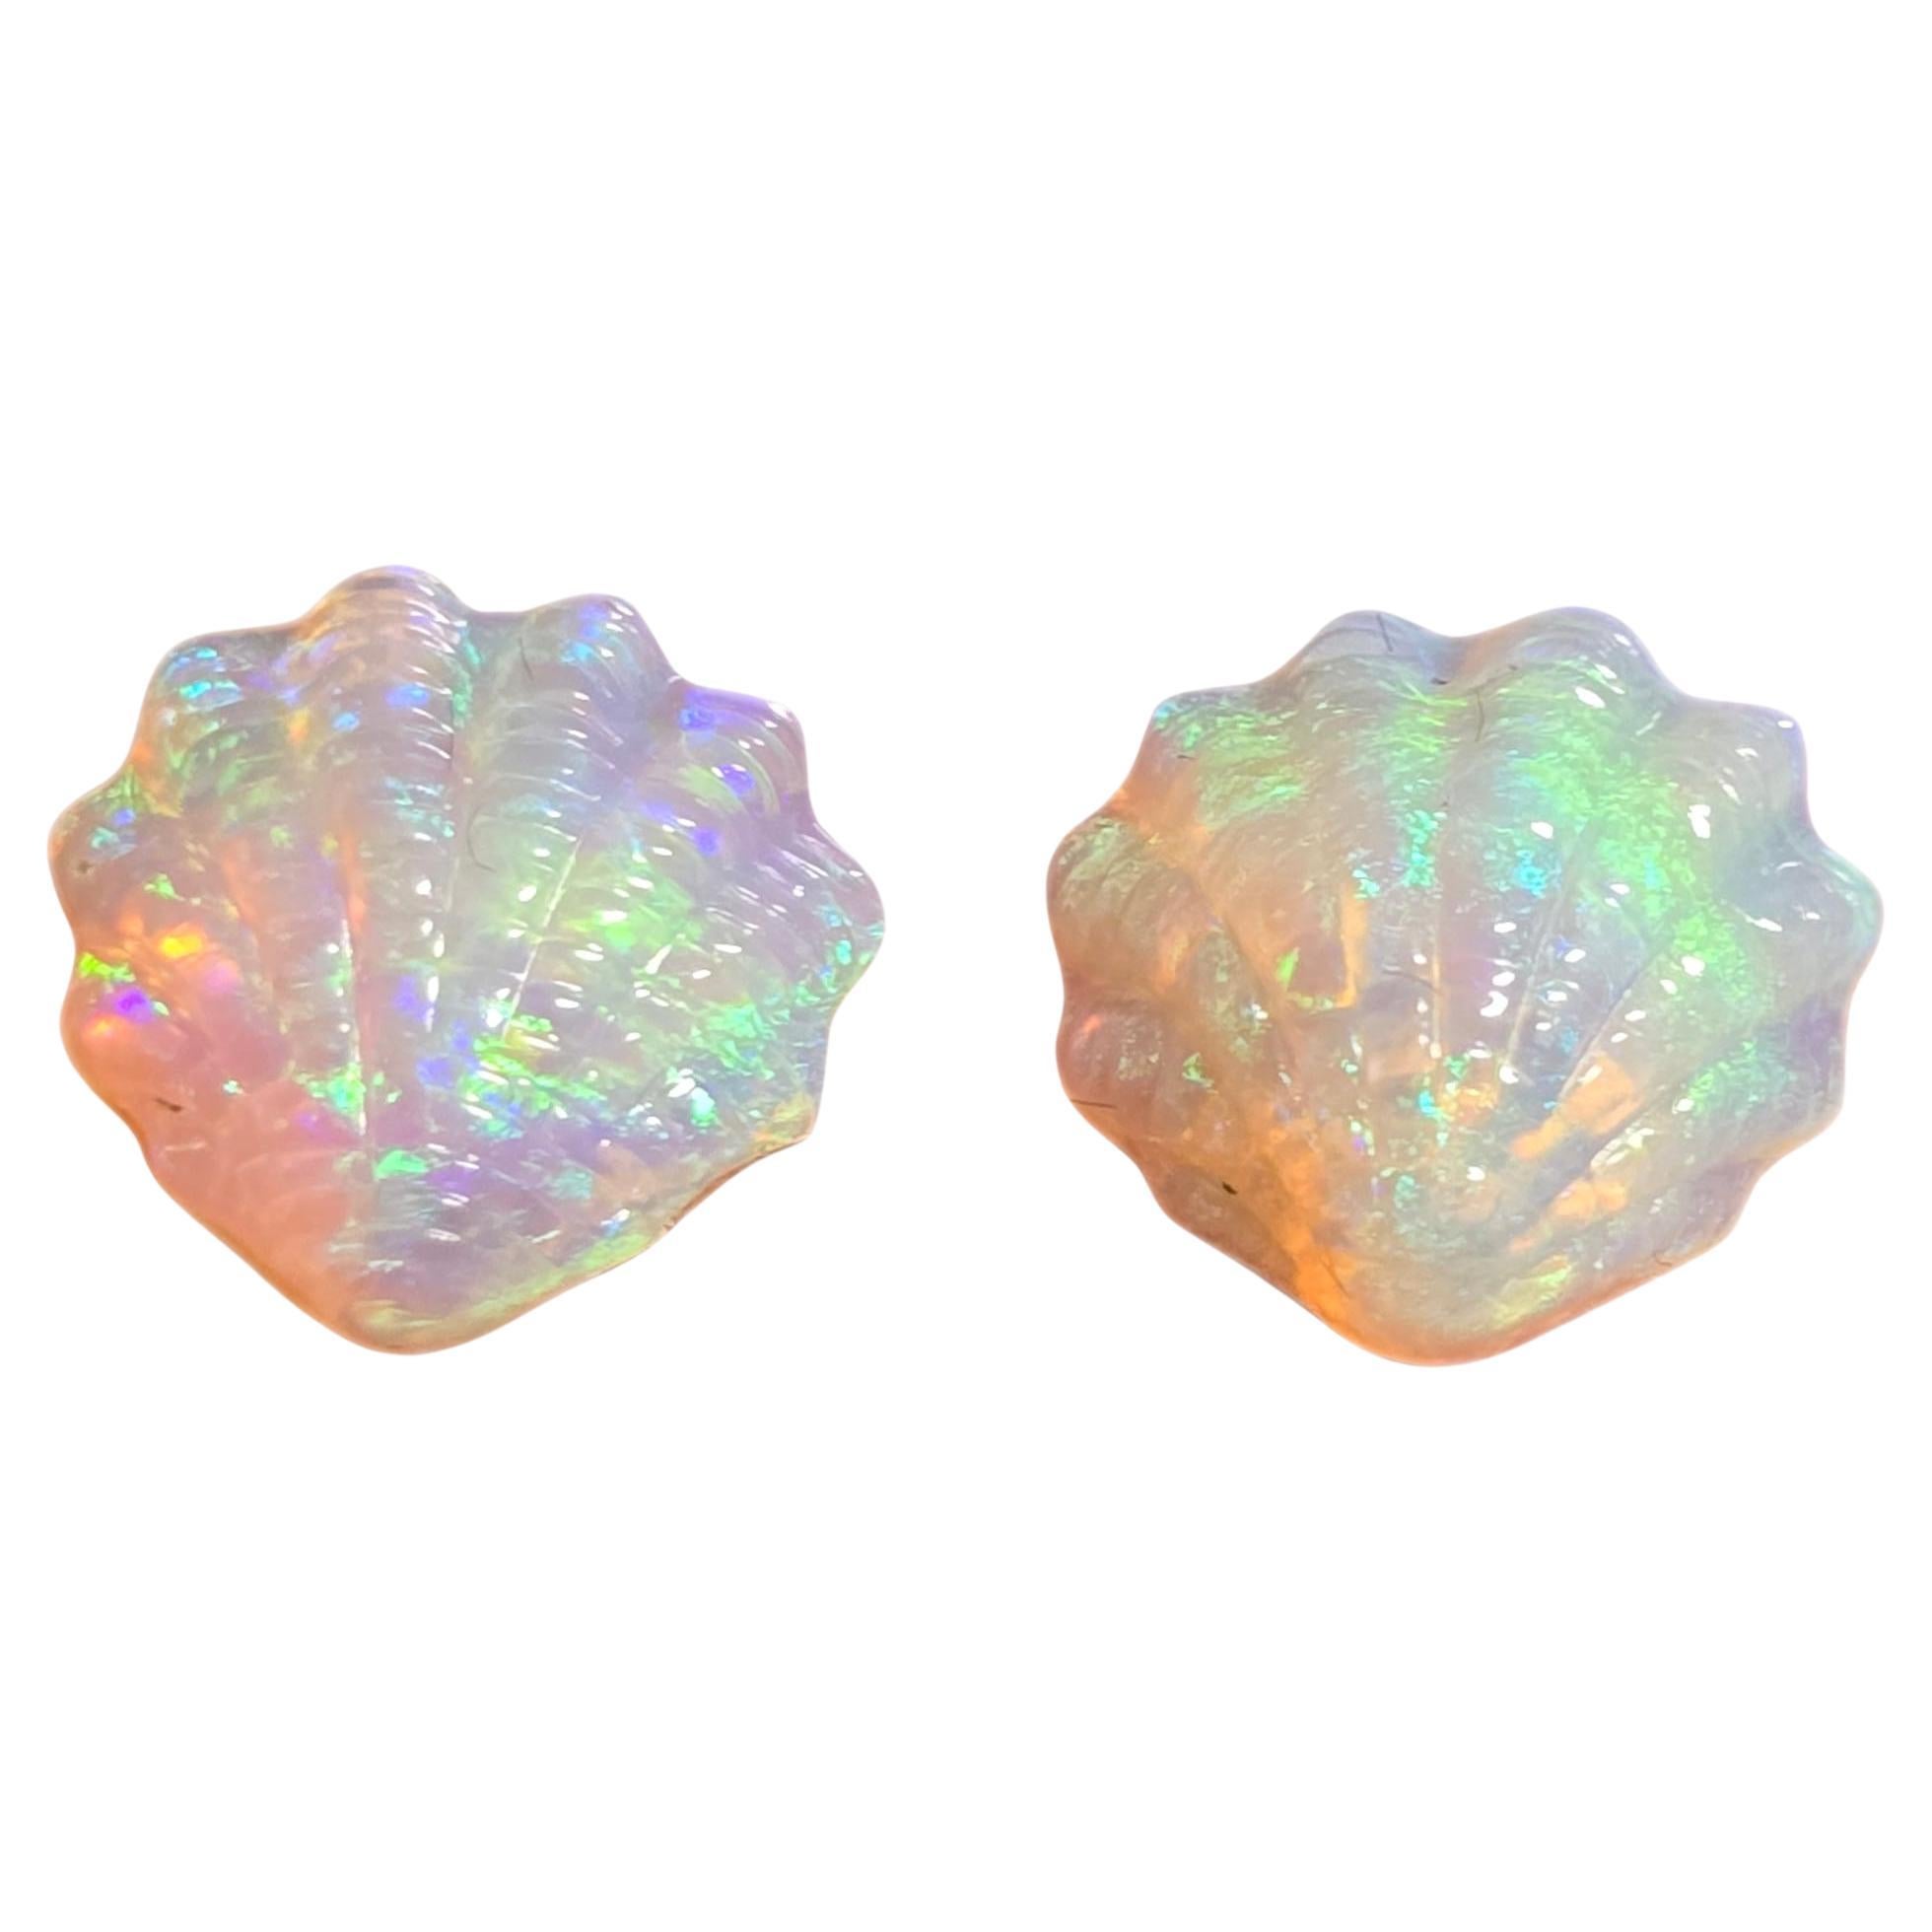 Natural 4.88 Ct Crystal Shell Australian opal pair mined by Sue Cooper